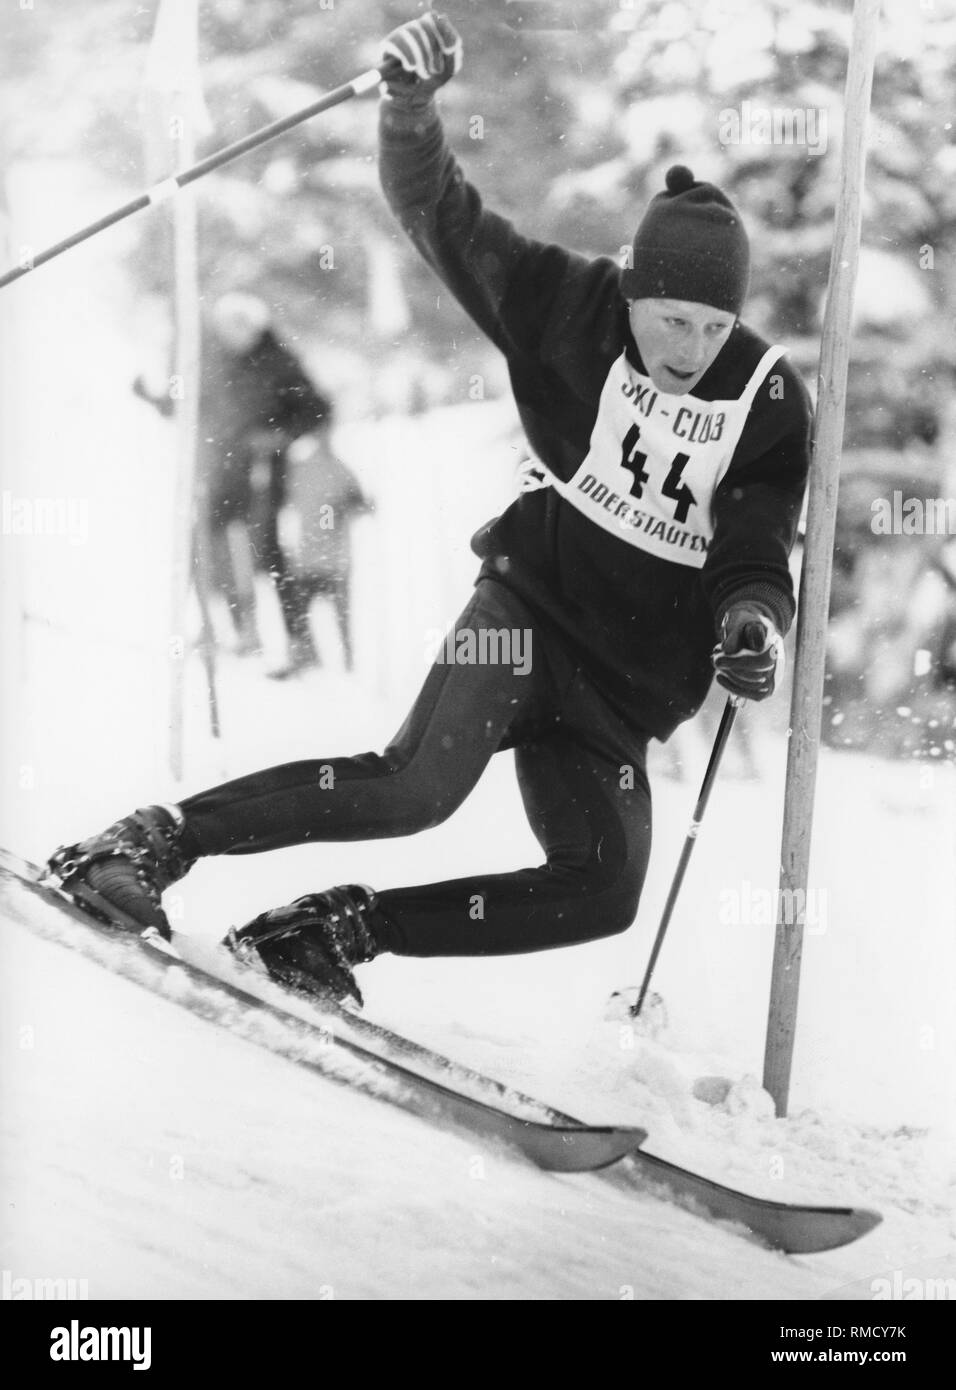 Ski racer Ludwig Leitner at a race in Oberstaufen. Stock Photo